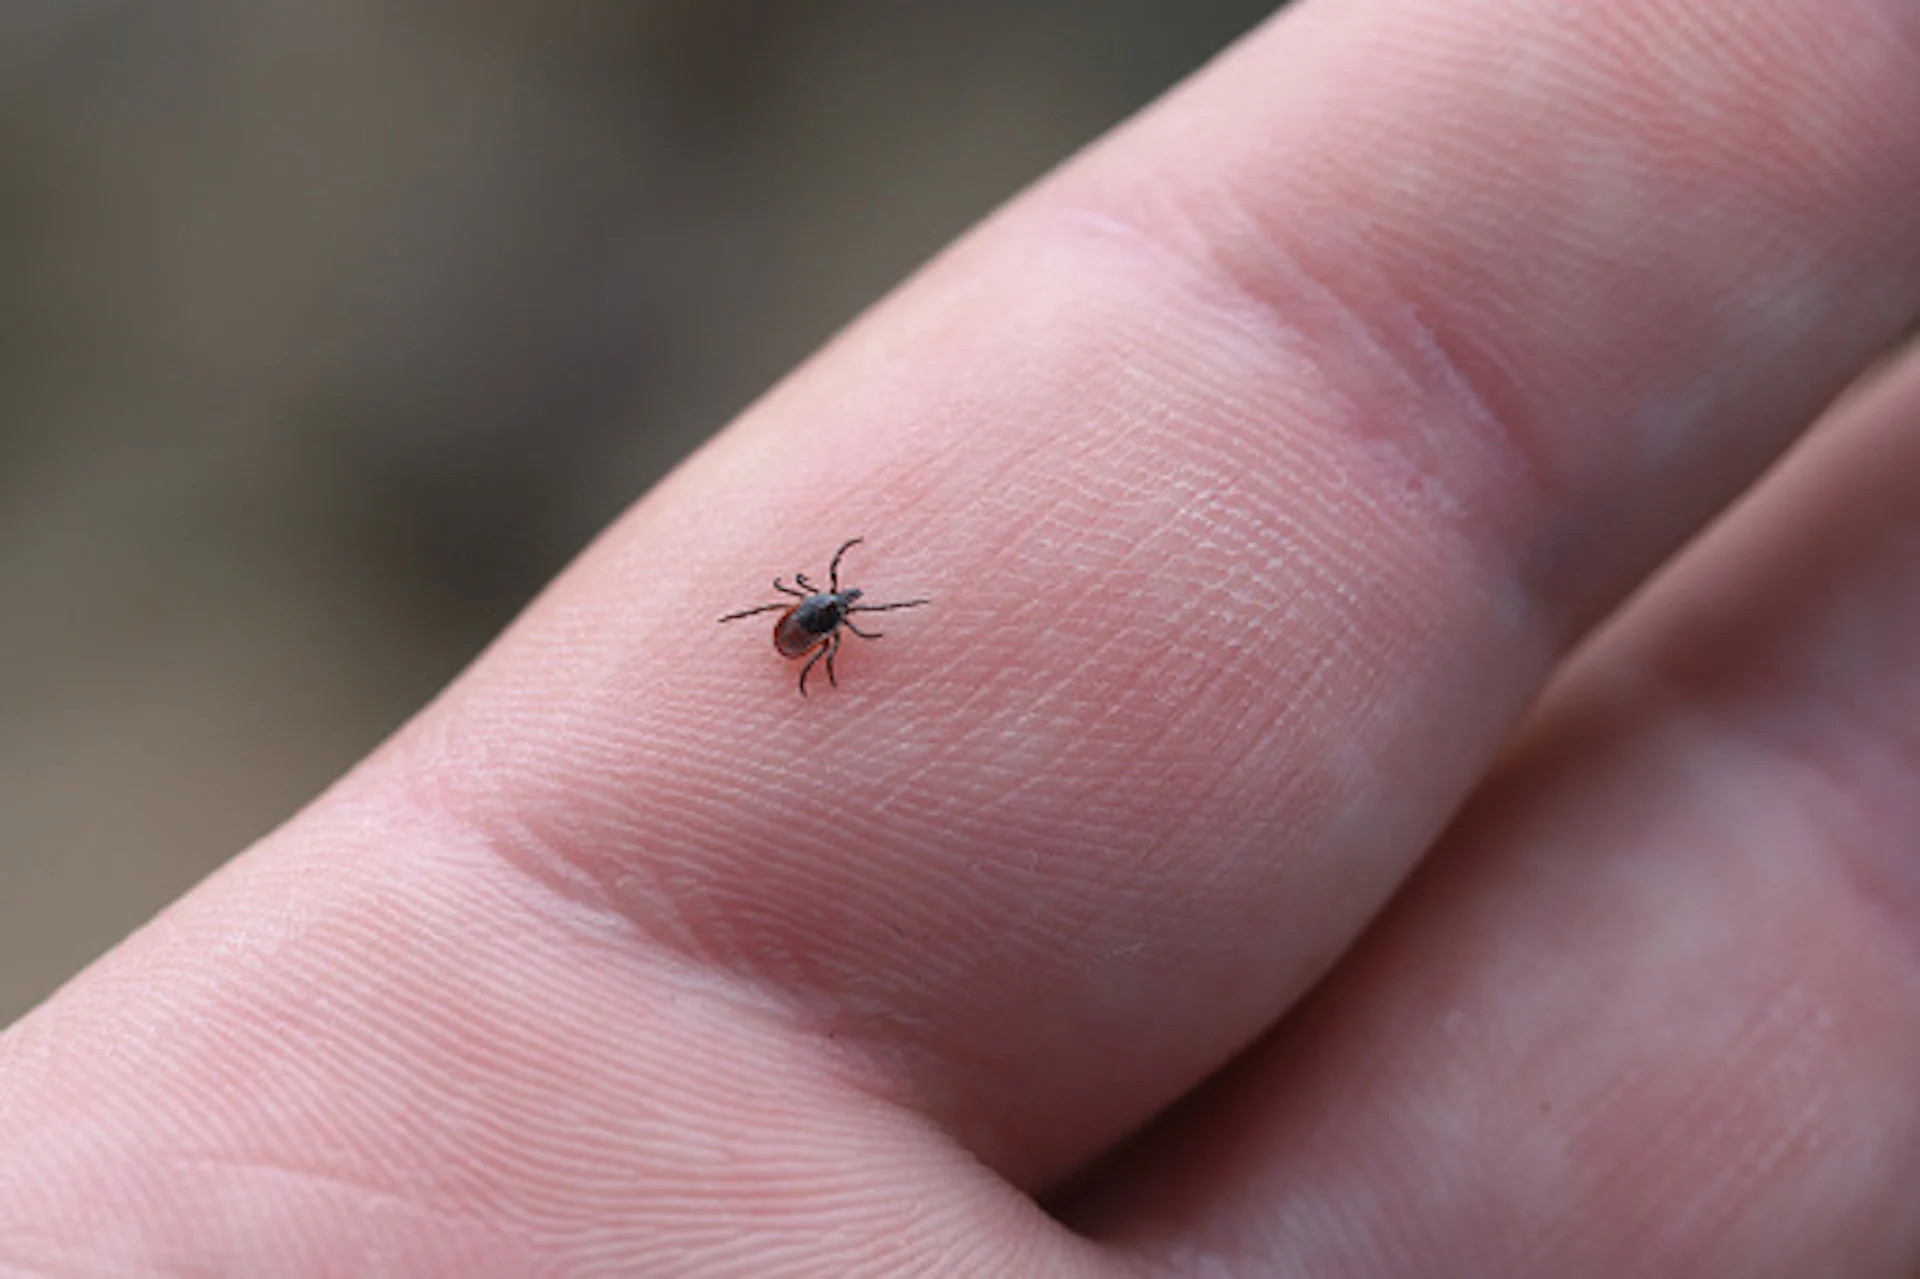 Ticks becoming more common in central Labrador as the region gets warmer